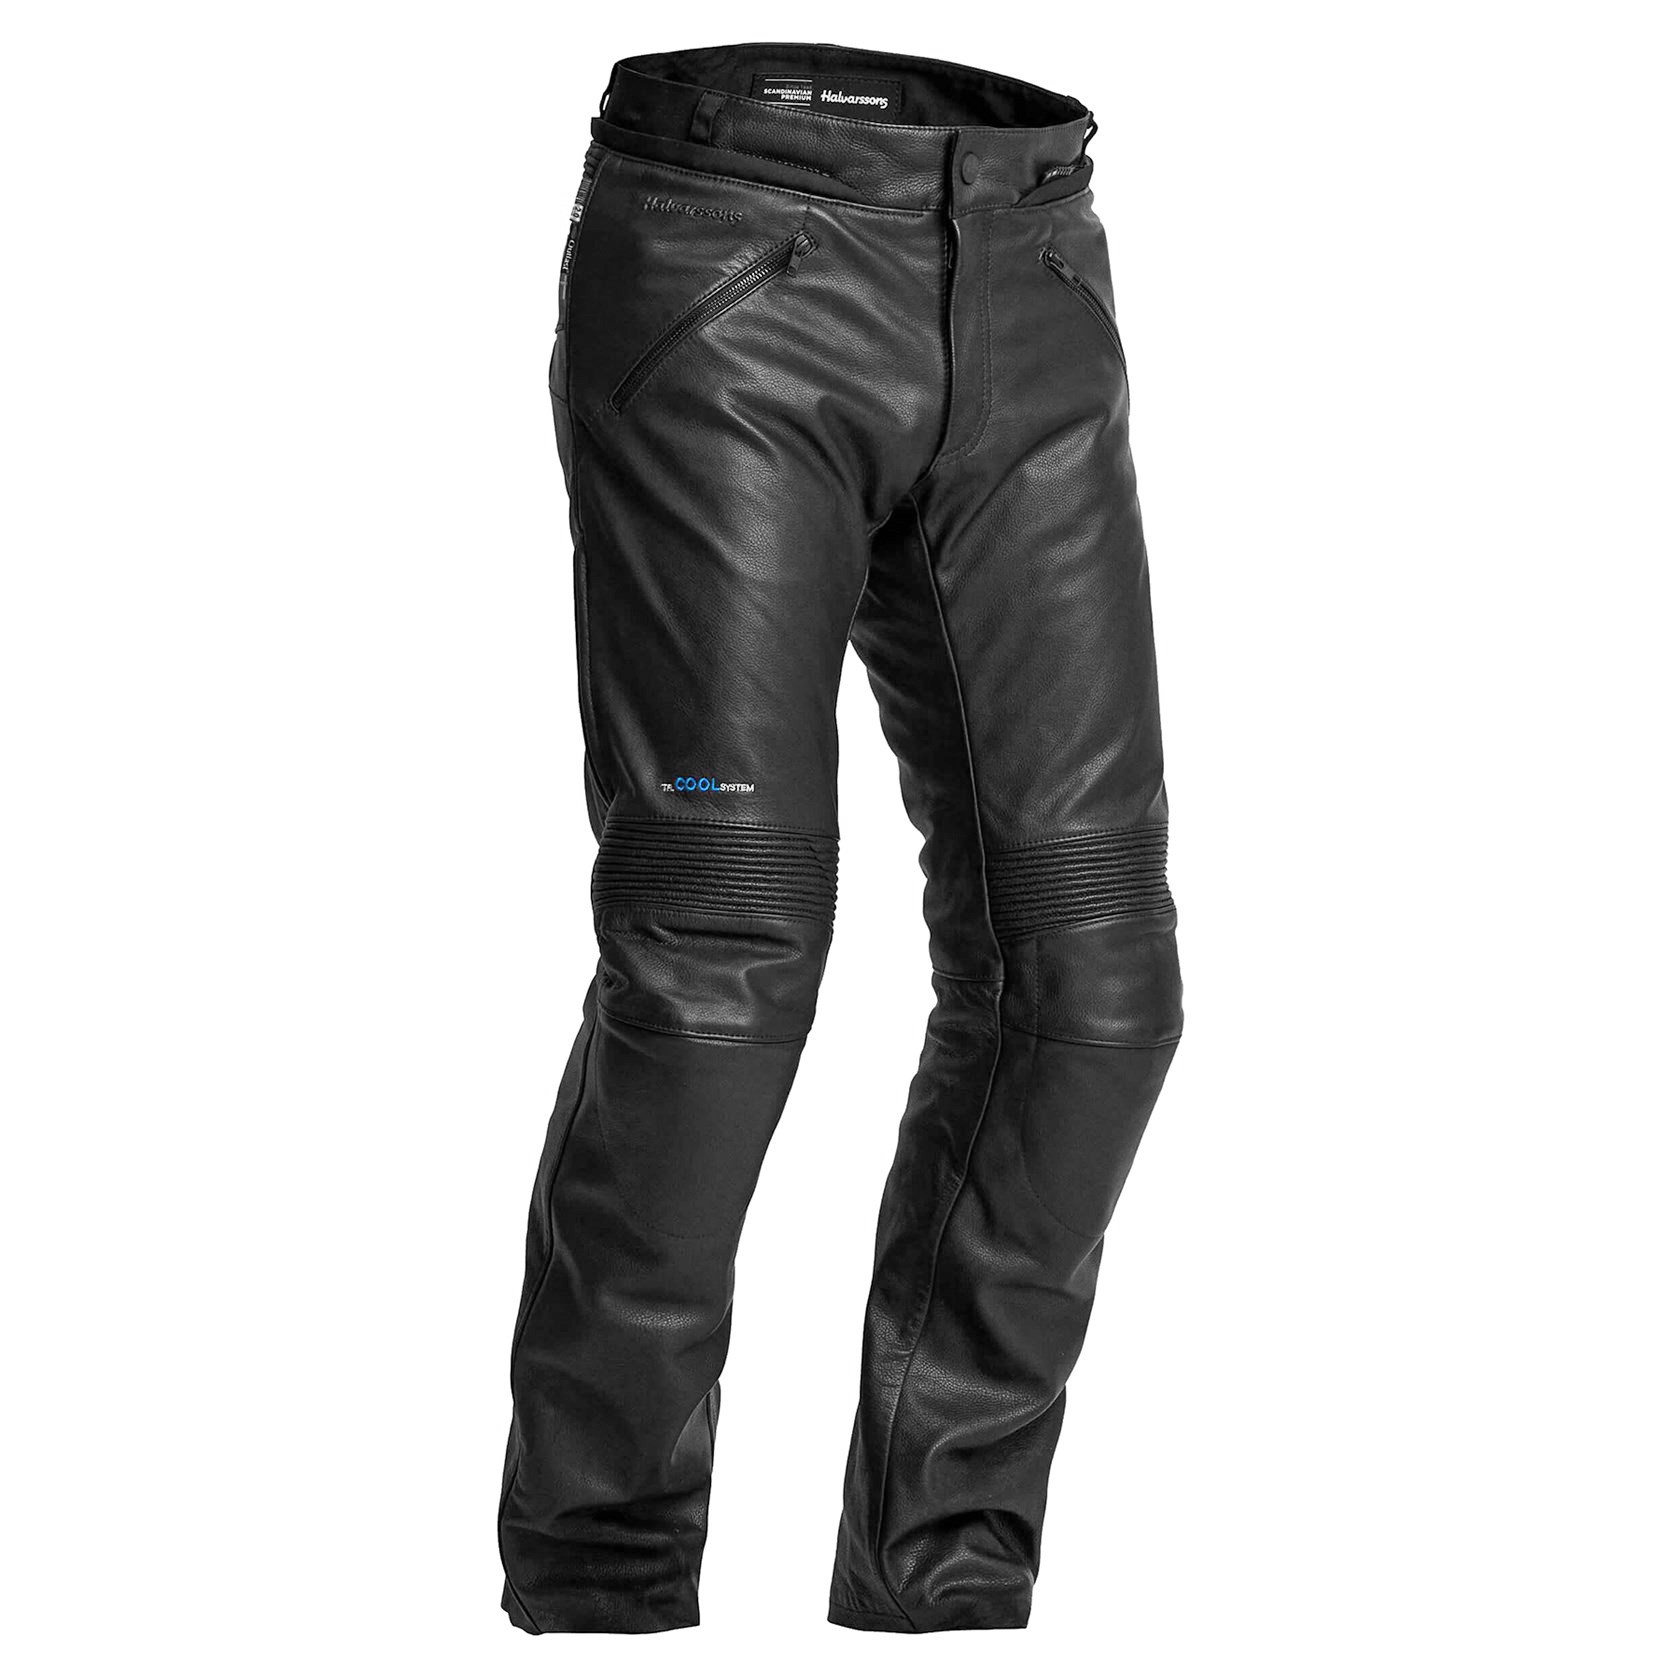 Leather Motorcycle Riding Pants - Made with cowhide leather